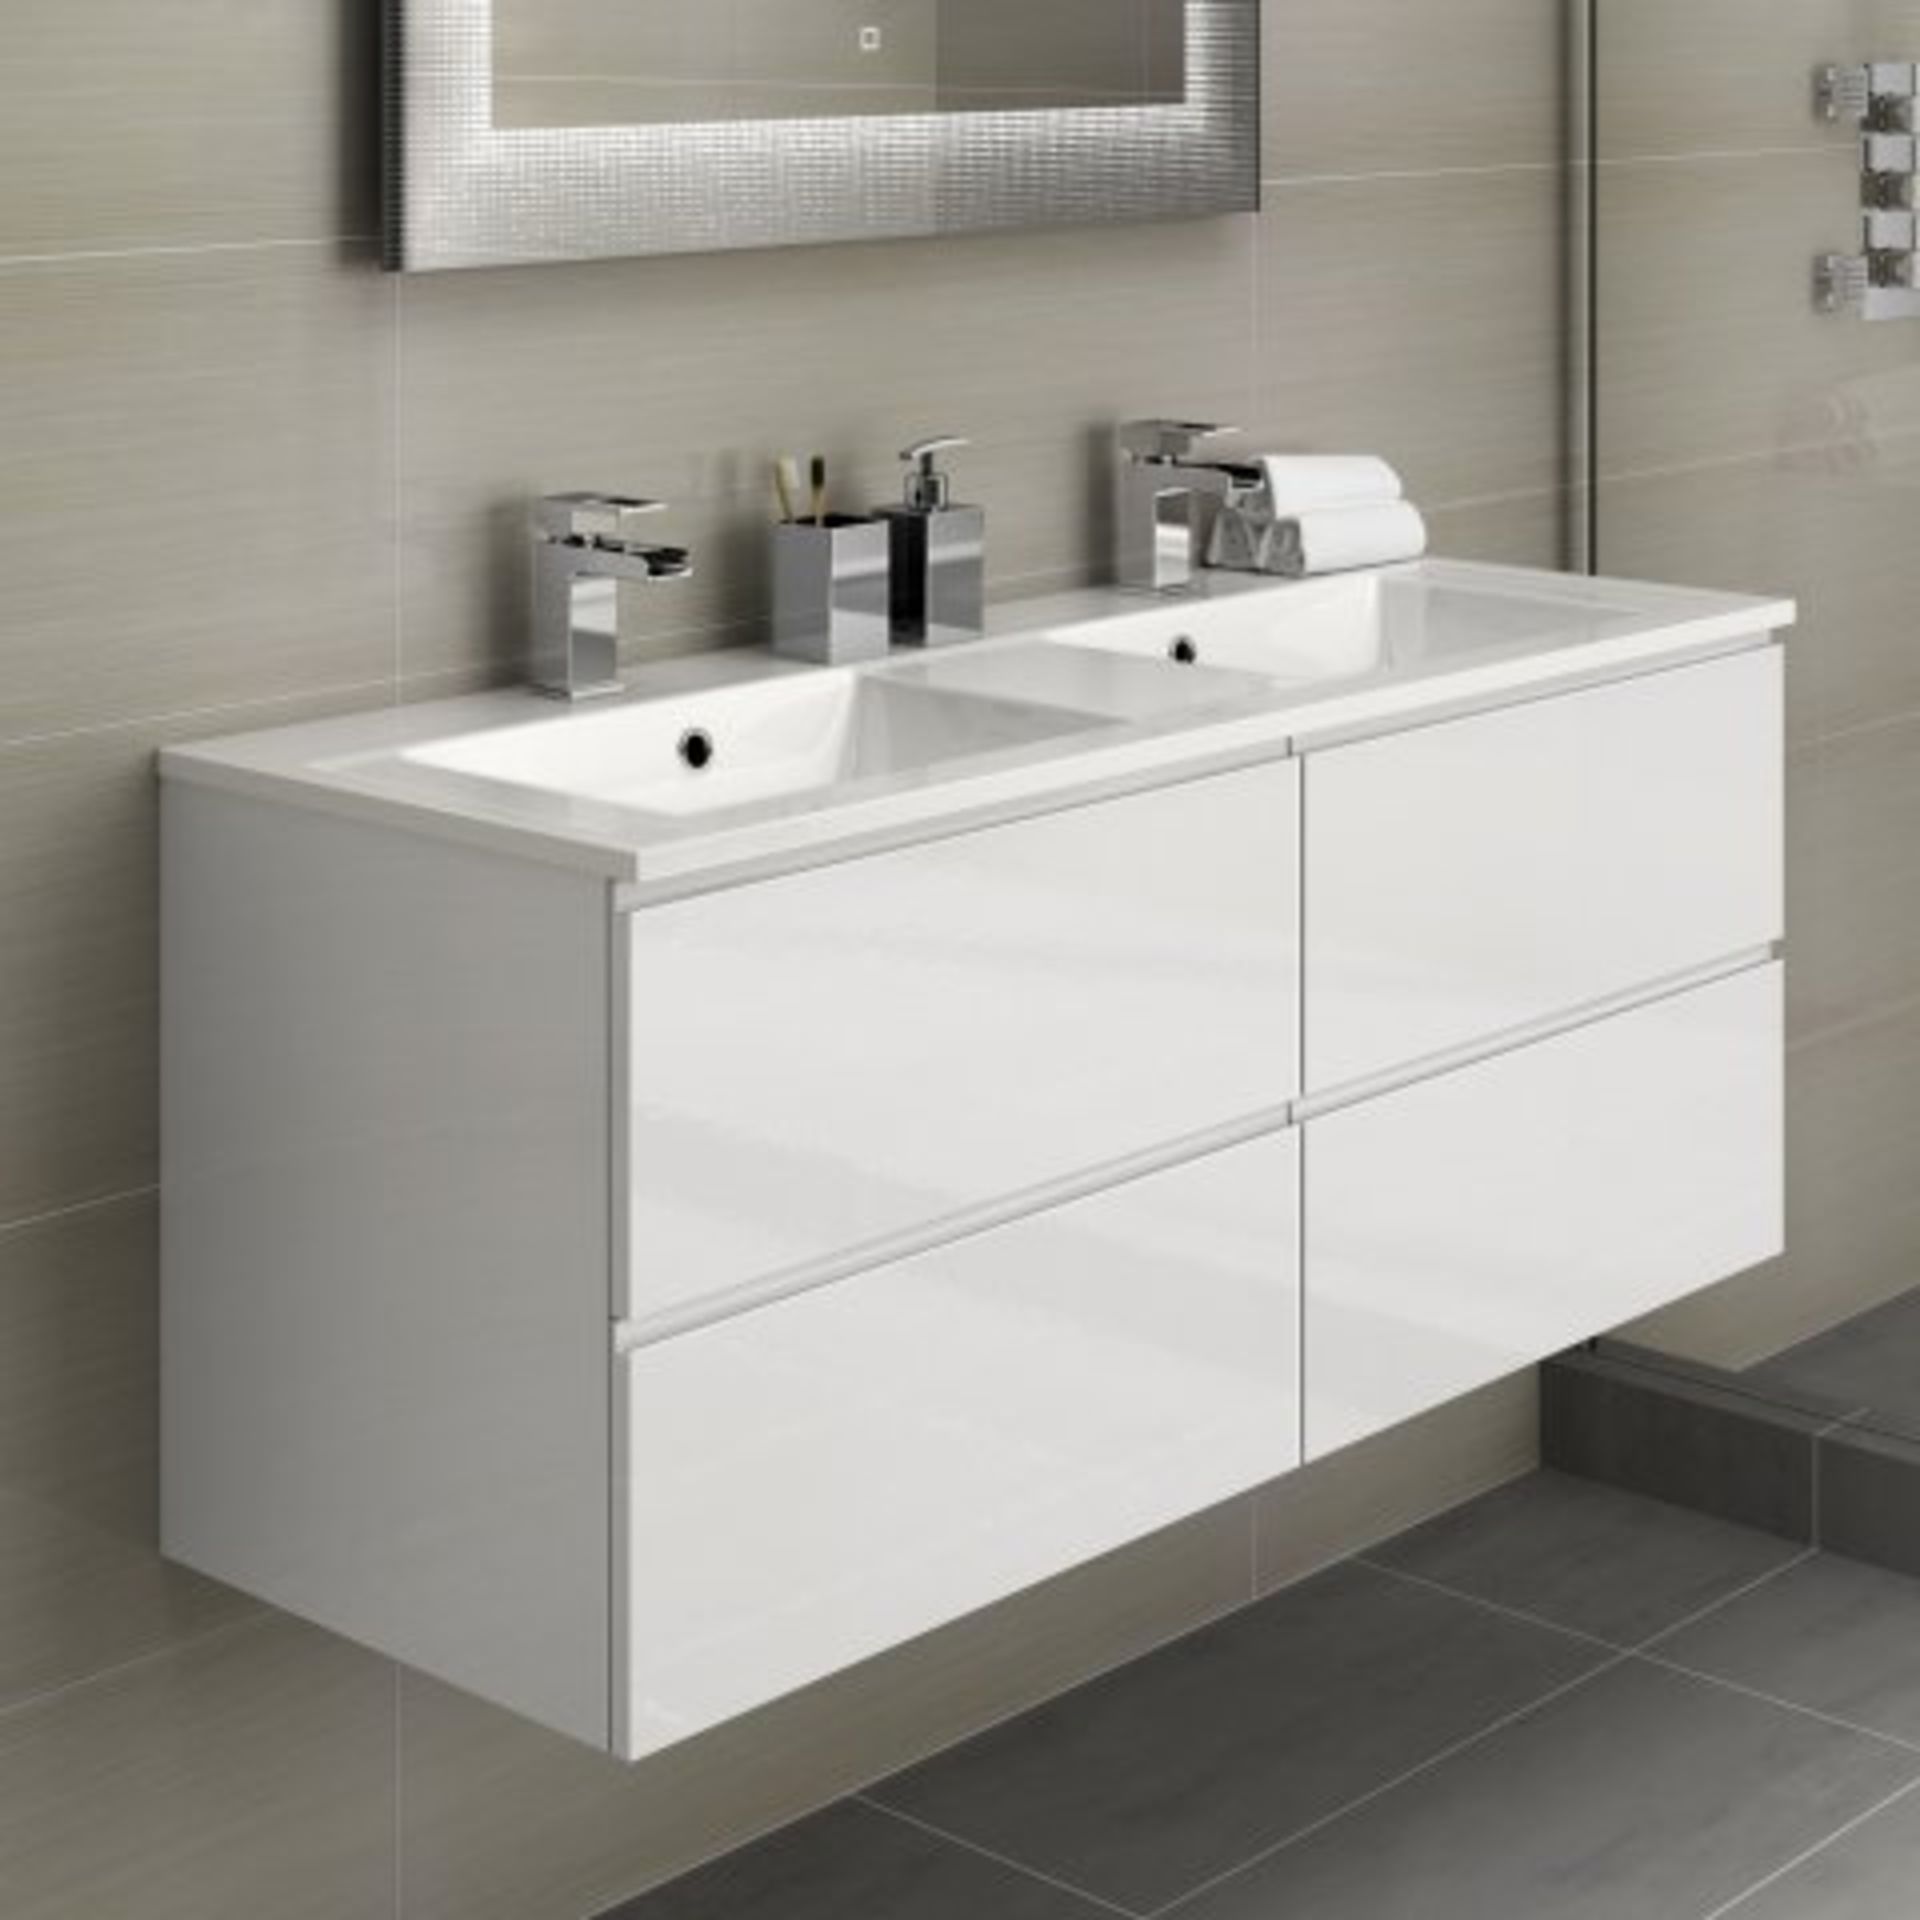 (O3) 1200mm Trevia High Gloss White Double Basin Cabinet - Wall Hung. RRP £1,199. COMES COMPLETE